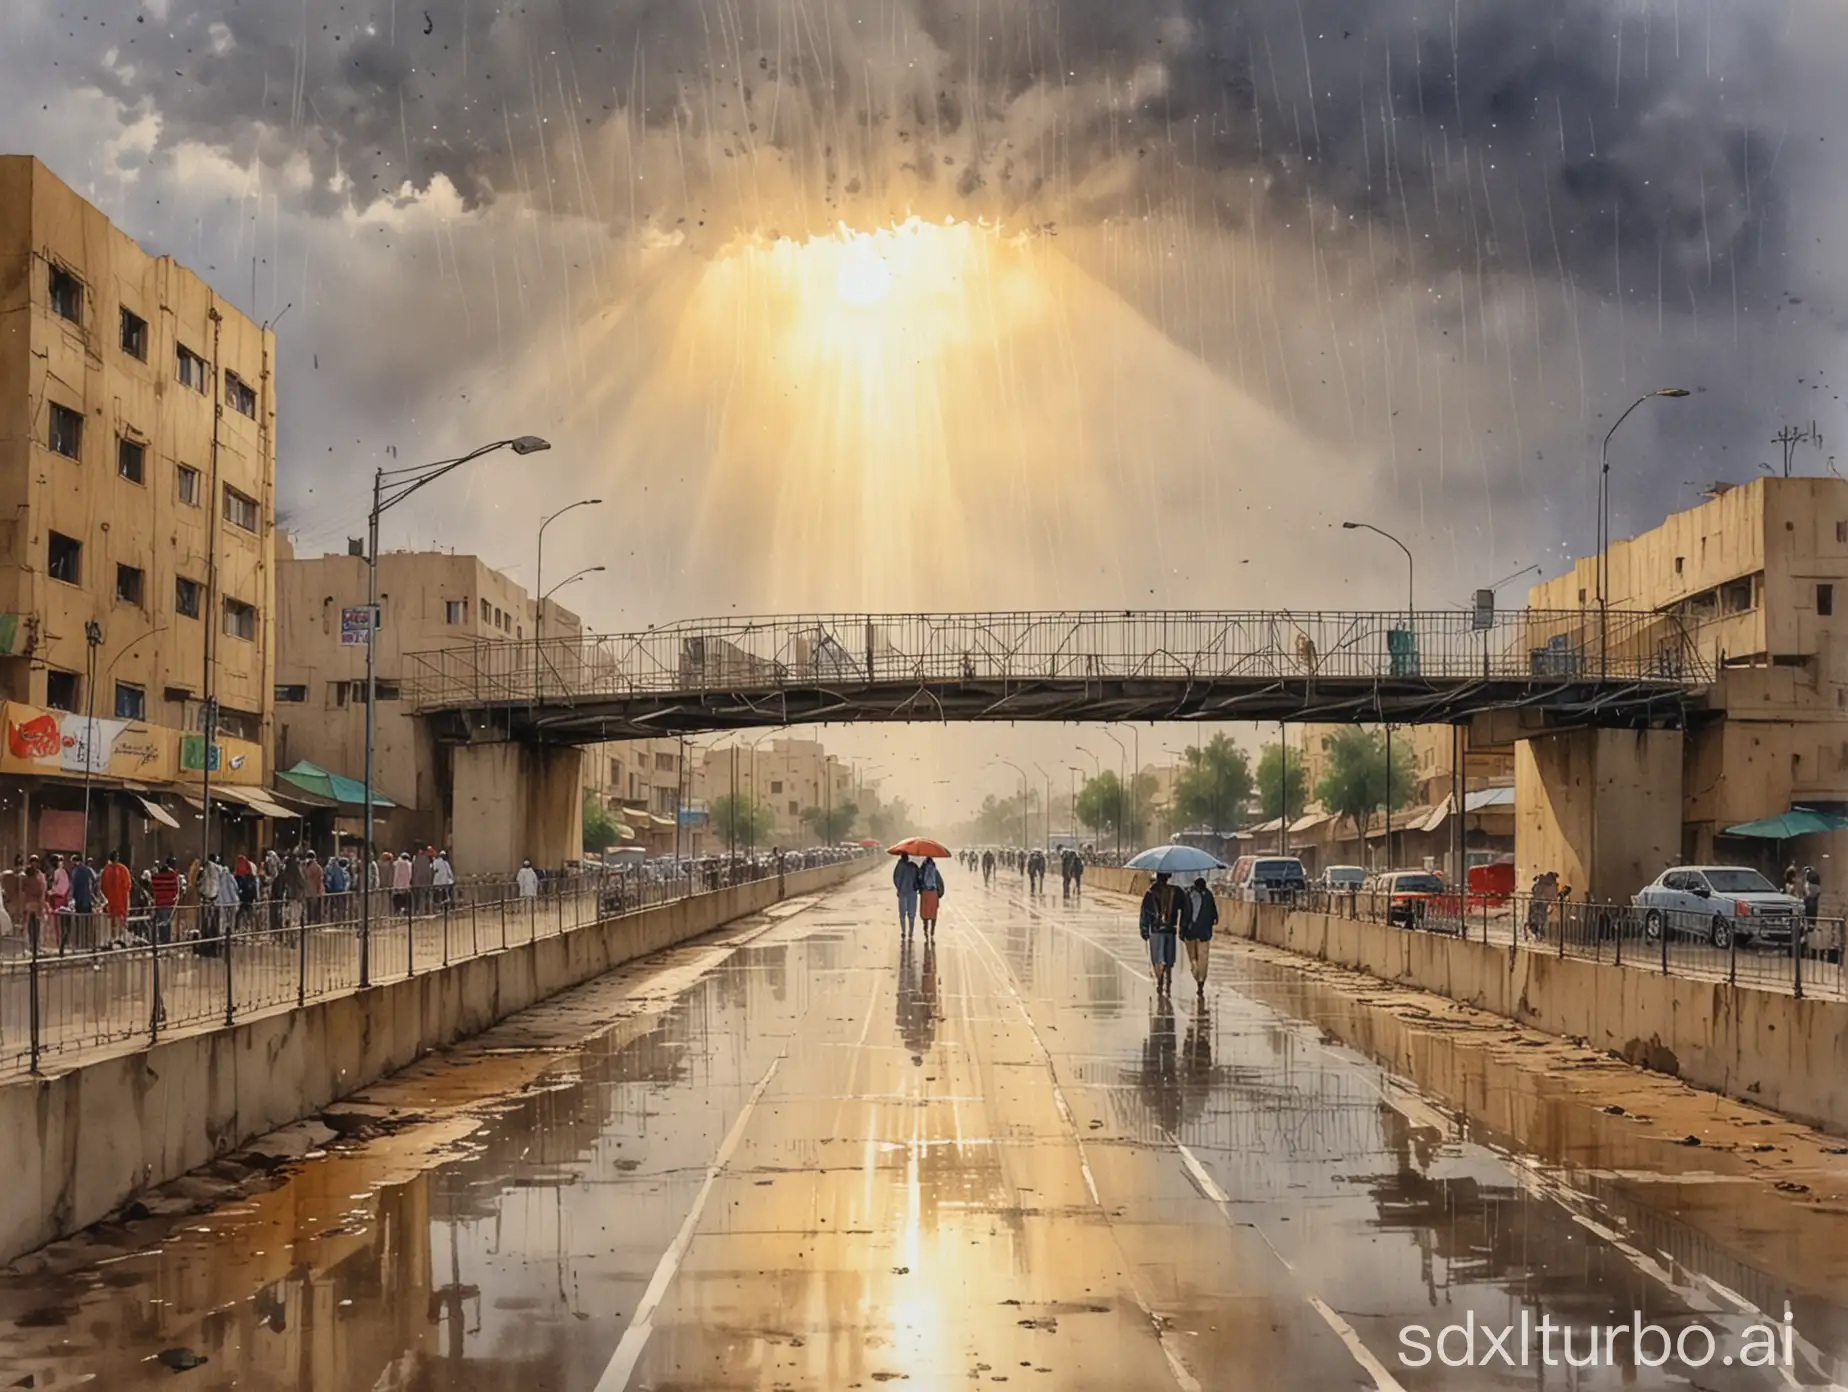 Rainy-Day-in-Baghdad-Pedestrian-Bridge-Over-Busy-Street-in-Watercolor